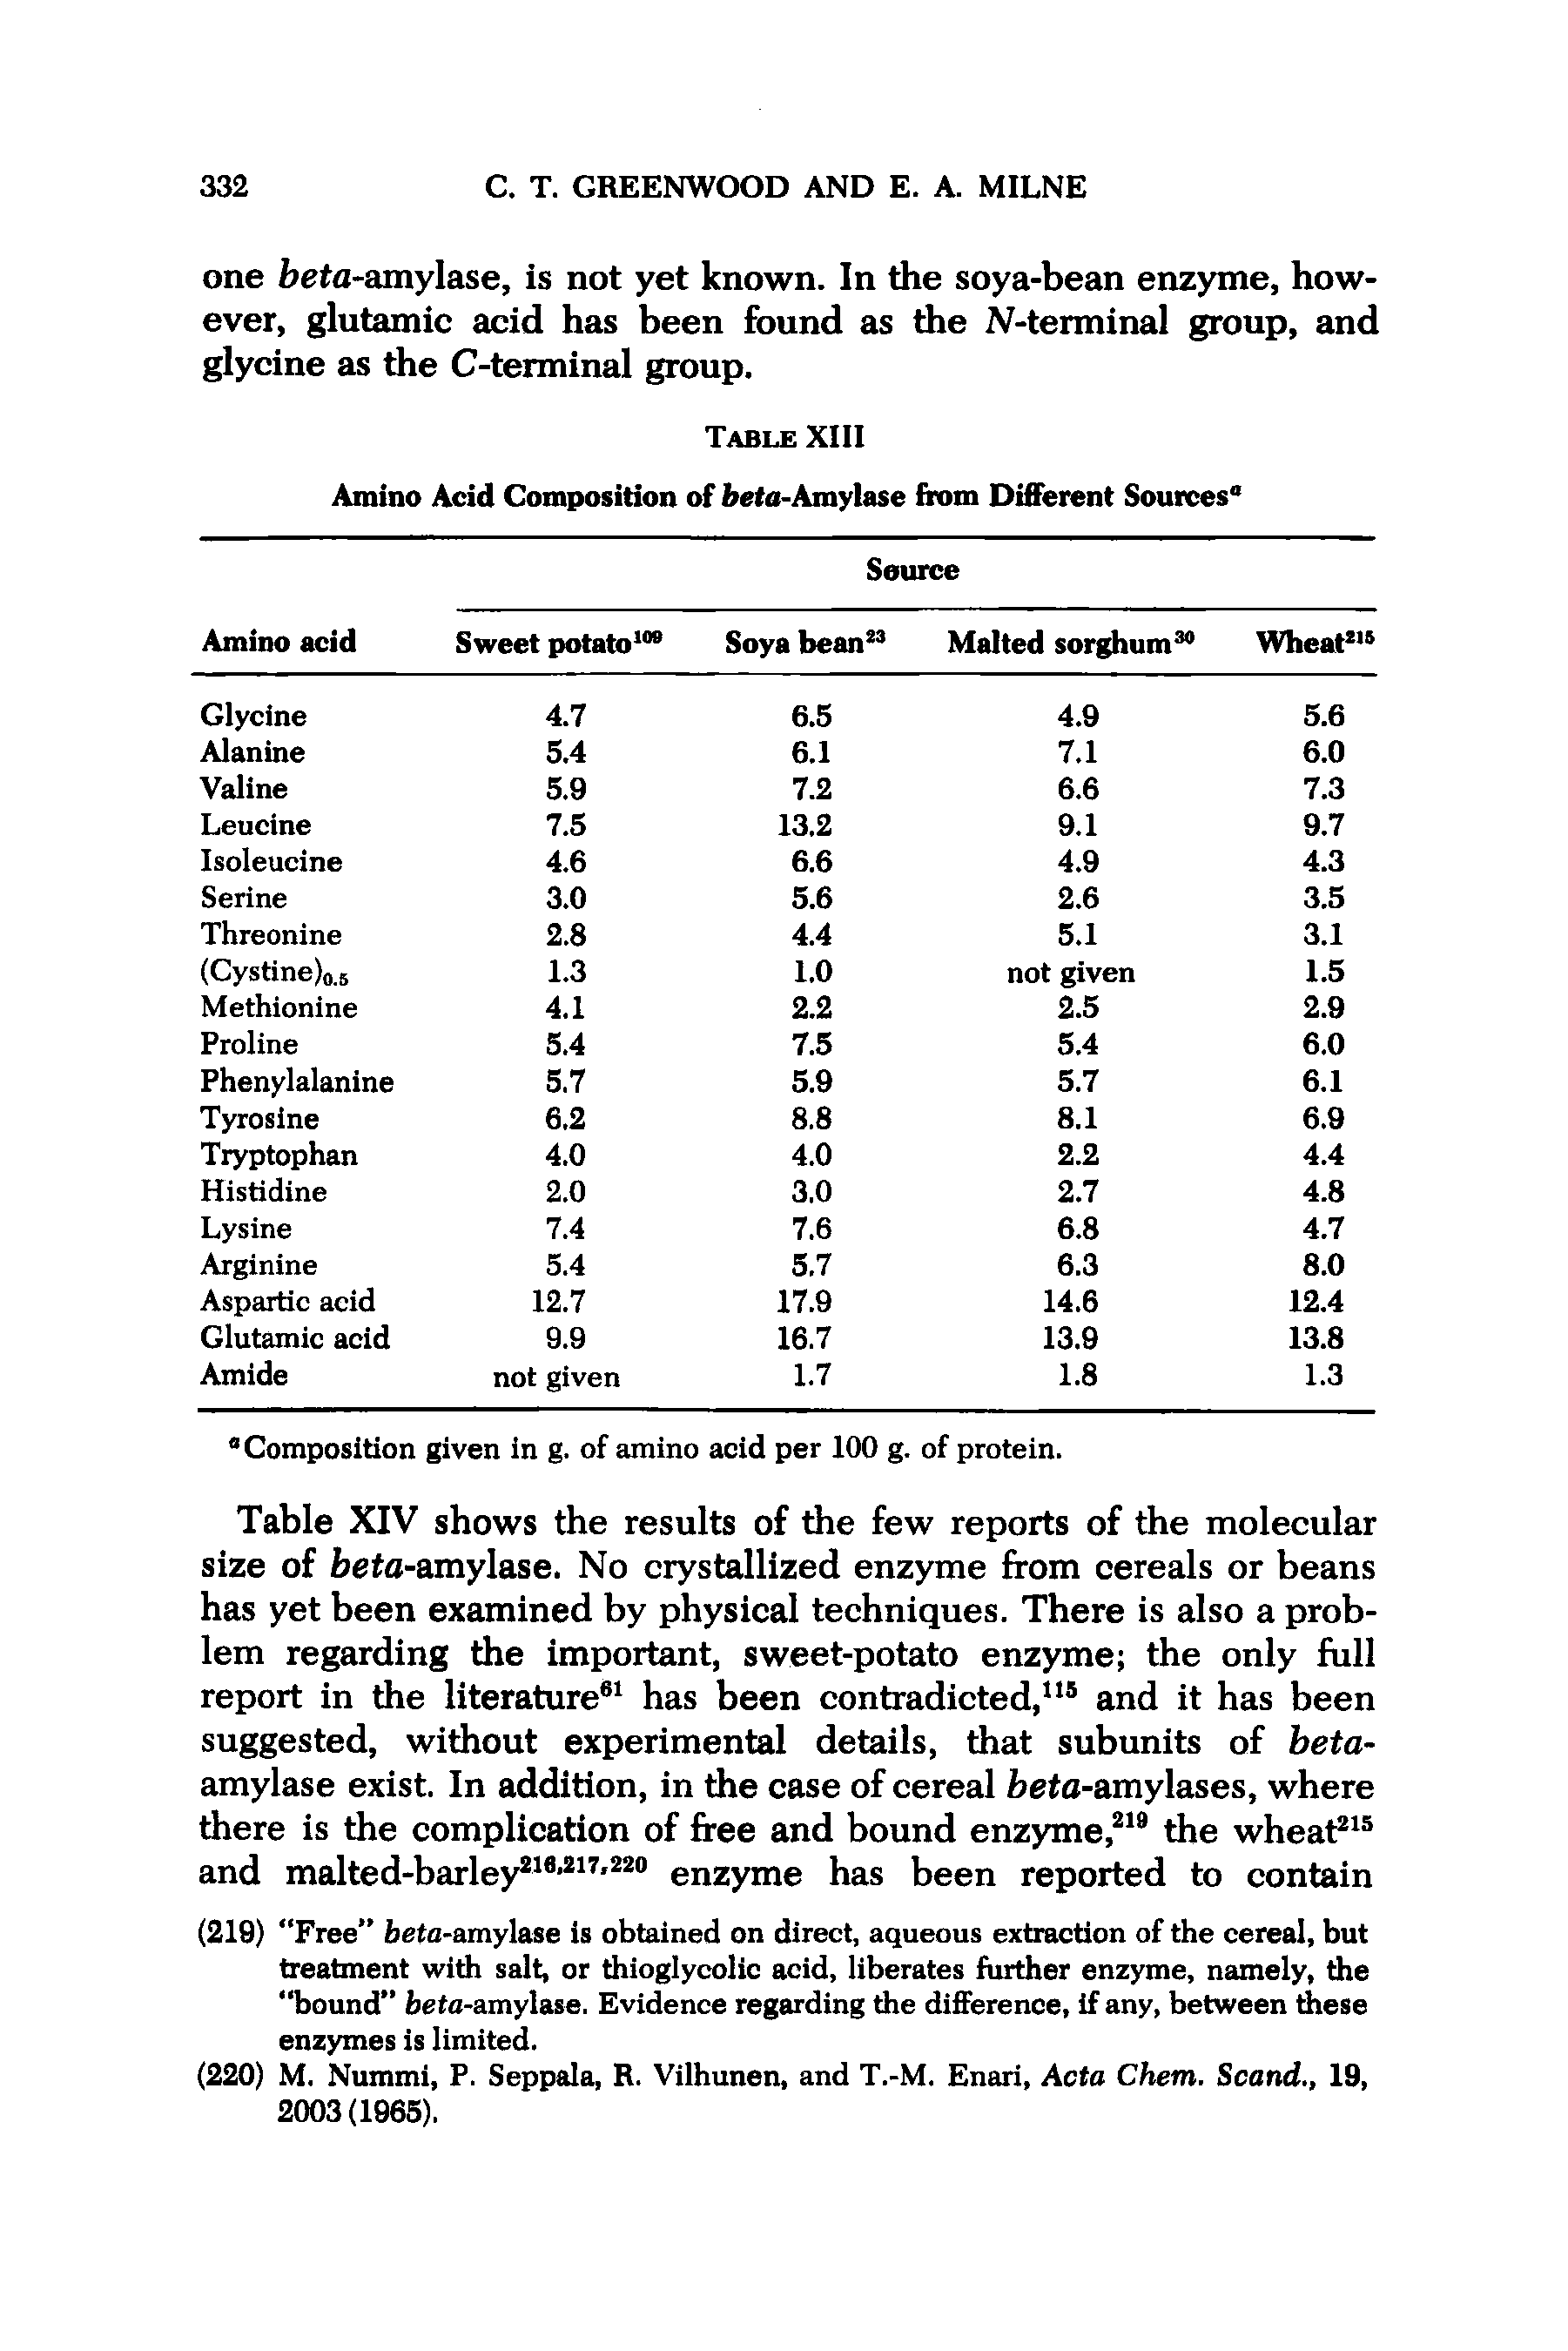 Table XIV shows the results of the few reports of the molecular size of beta-amylase. No crystallized enzyme from cereals or beans has yet been examined by physical techniques. There is also a problem regarding the important, sweet-potato enzyme the only full report in the literature has been contradicted, and it has been suggested, without experimental details, that subunits of beta-amylase exist. In addition, in the case of cereal fcefo-amylases, where there is the complication of free and bound enzyme, the wheat and malted-barley enzyme has been reported to contain...